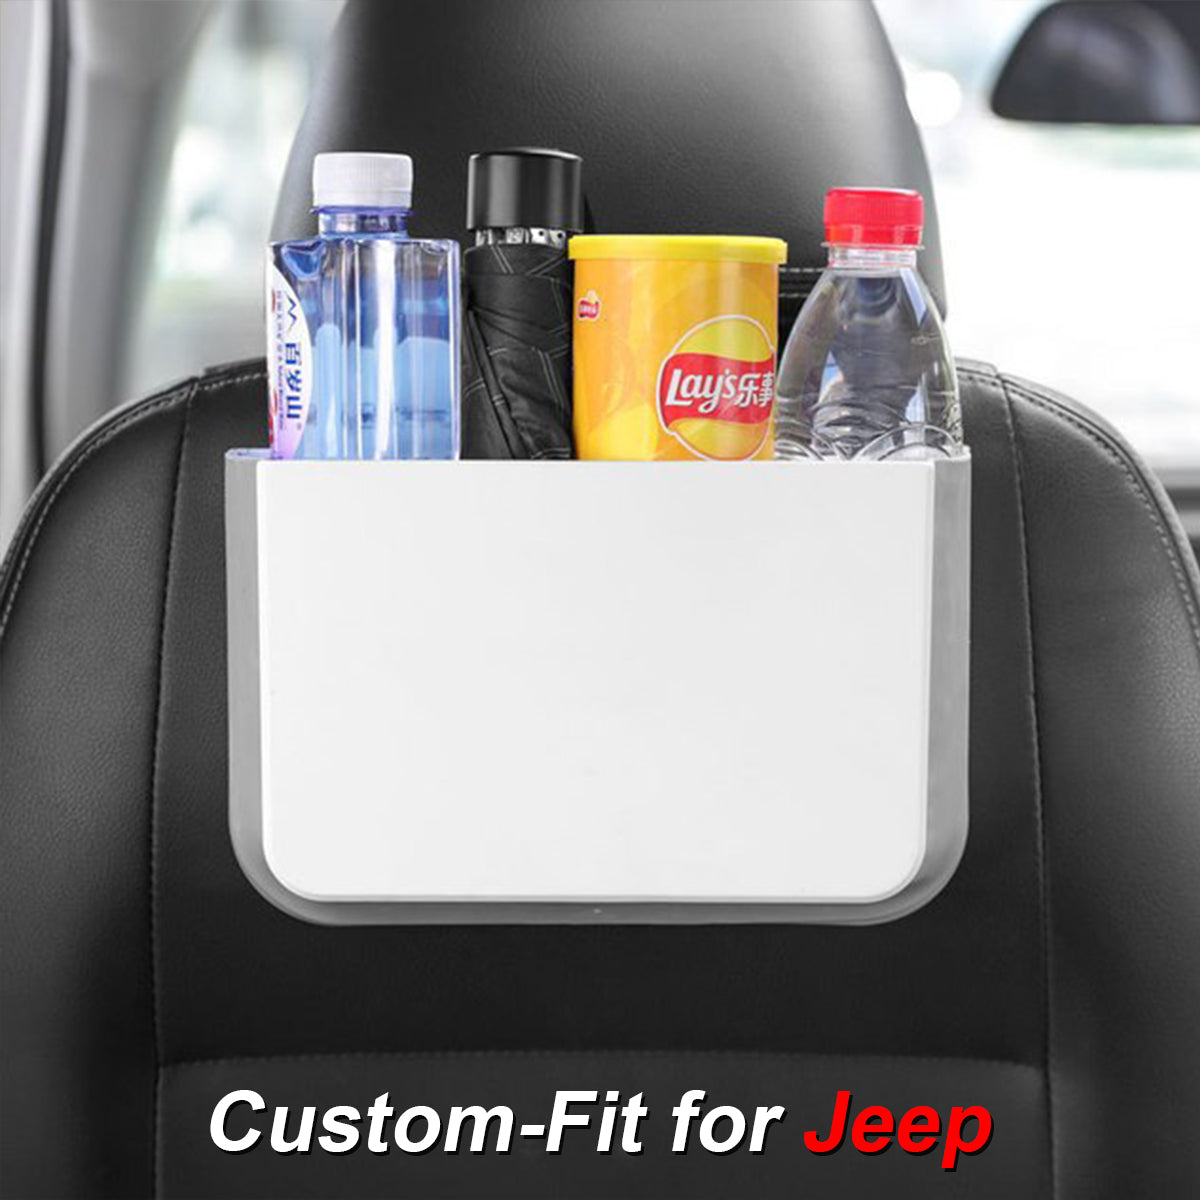 Hanging Waterproof Car Trash can-Foldable, Custom-Fit For Car, Waterproof, Equipped with Cup Holders and Trays DLJE251